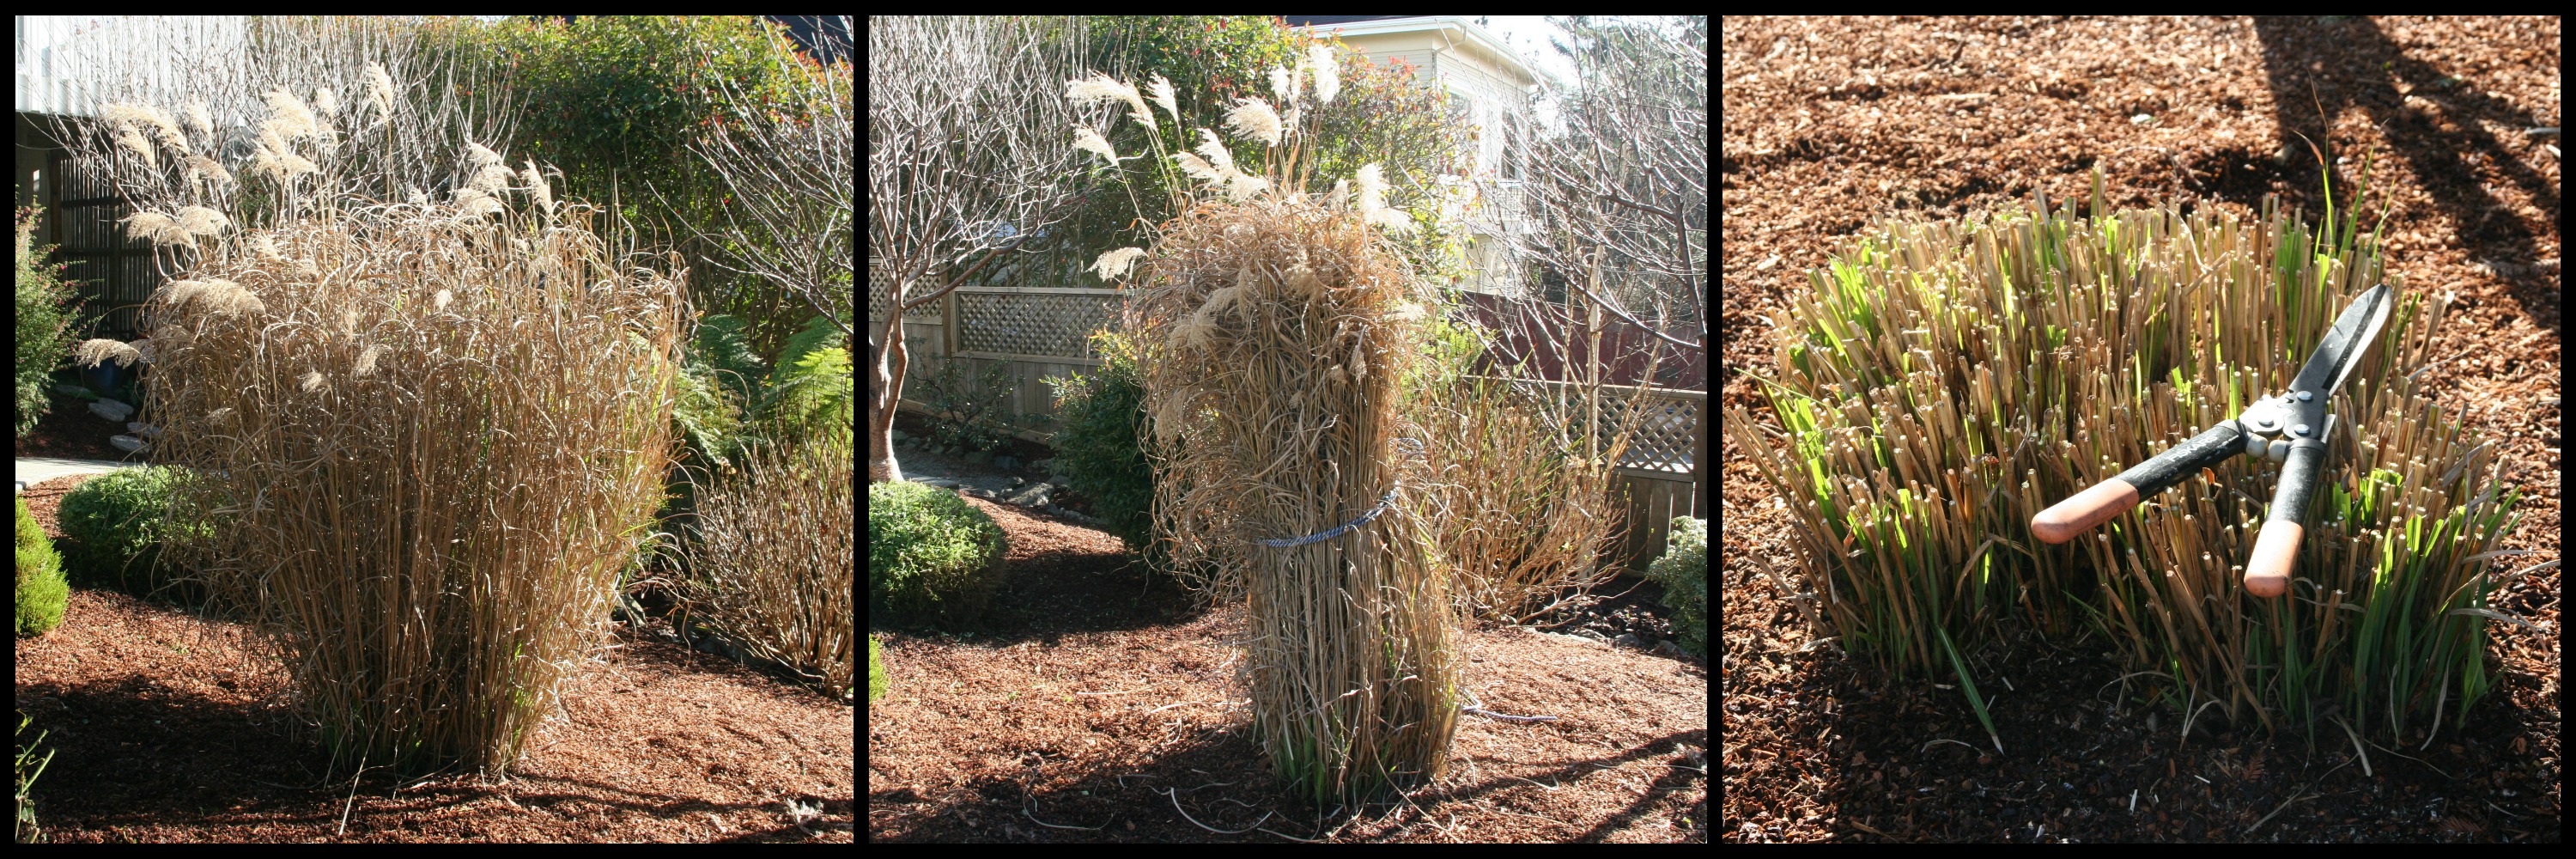 Pruning Miscanthus Grass: How to Cut Back Big Ornamental Grasses